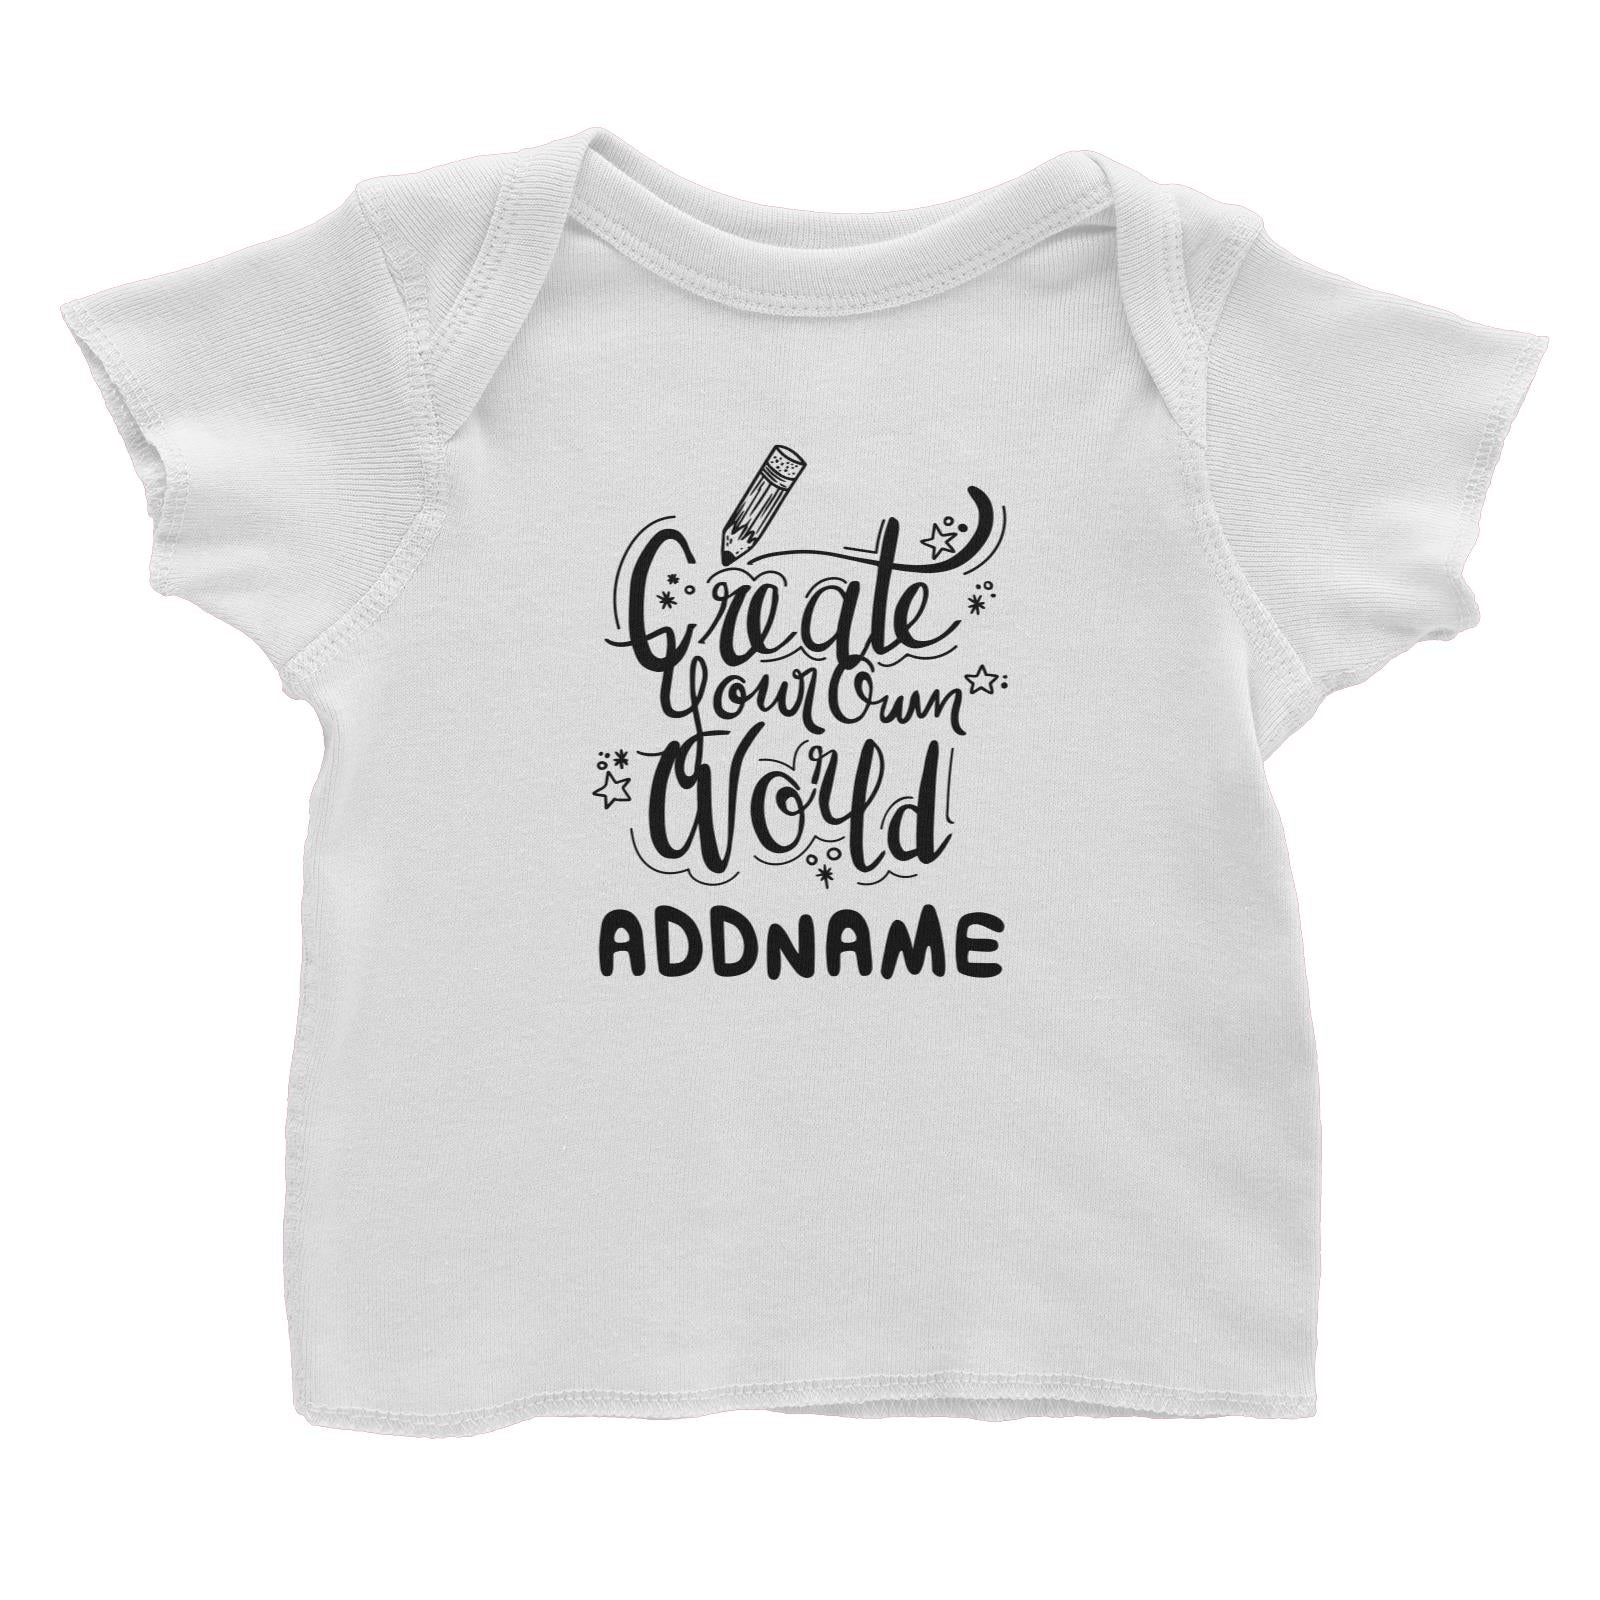 Children's Day Gift Series Create Your Own World Addname Baby T-Shirt